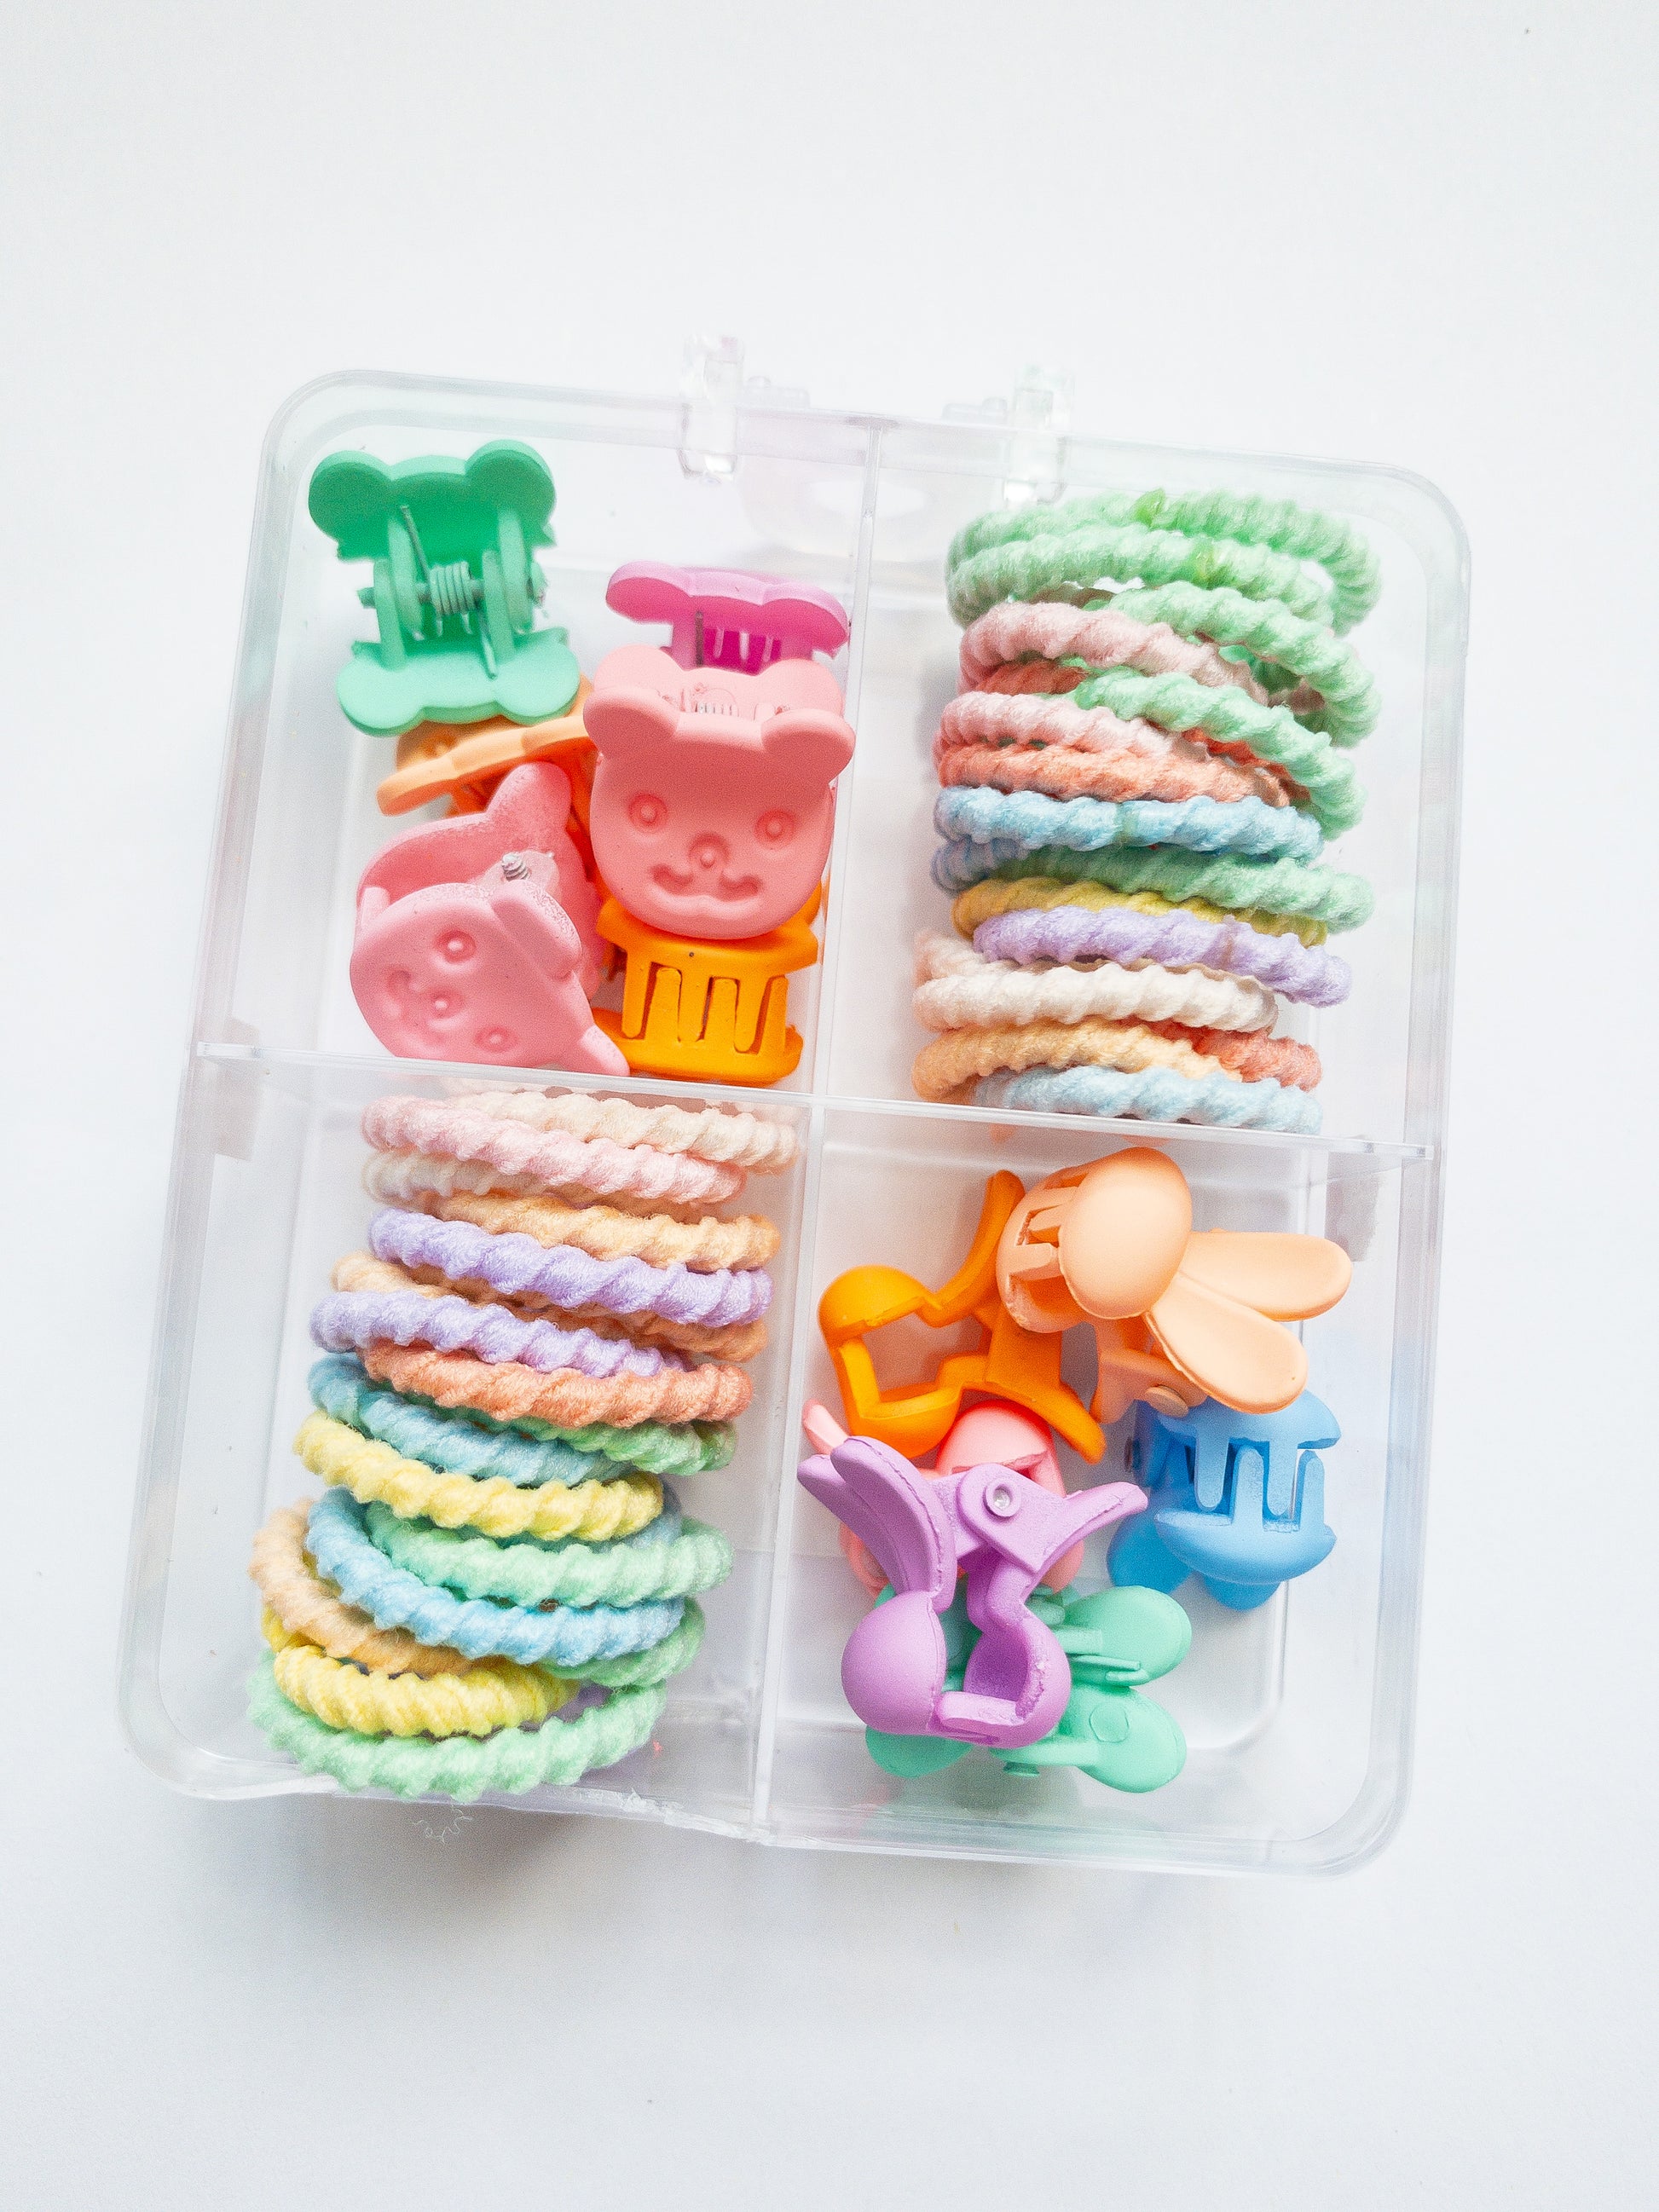 This mini hair claw set is the one you need! A boxed set with a mix of mini bunny hair claws and a mix of mini bear hair claws along with small hair ties. The hair ties are super soft, no tug and thin, perfect for those cute pigtails or braids. Clip the hair claws throughout to make that fun style.